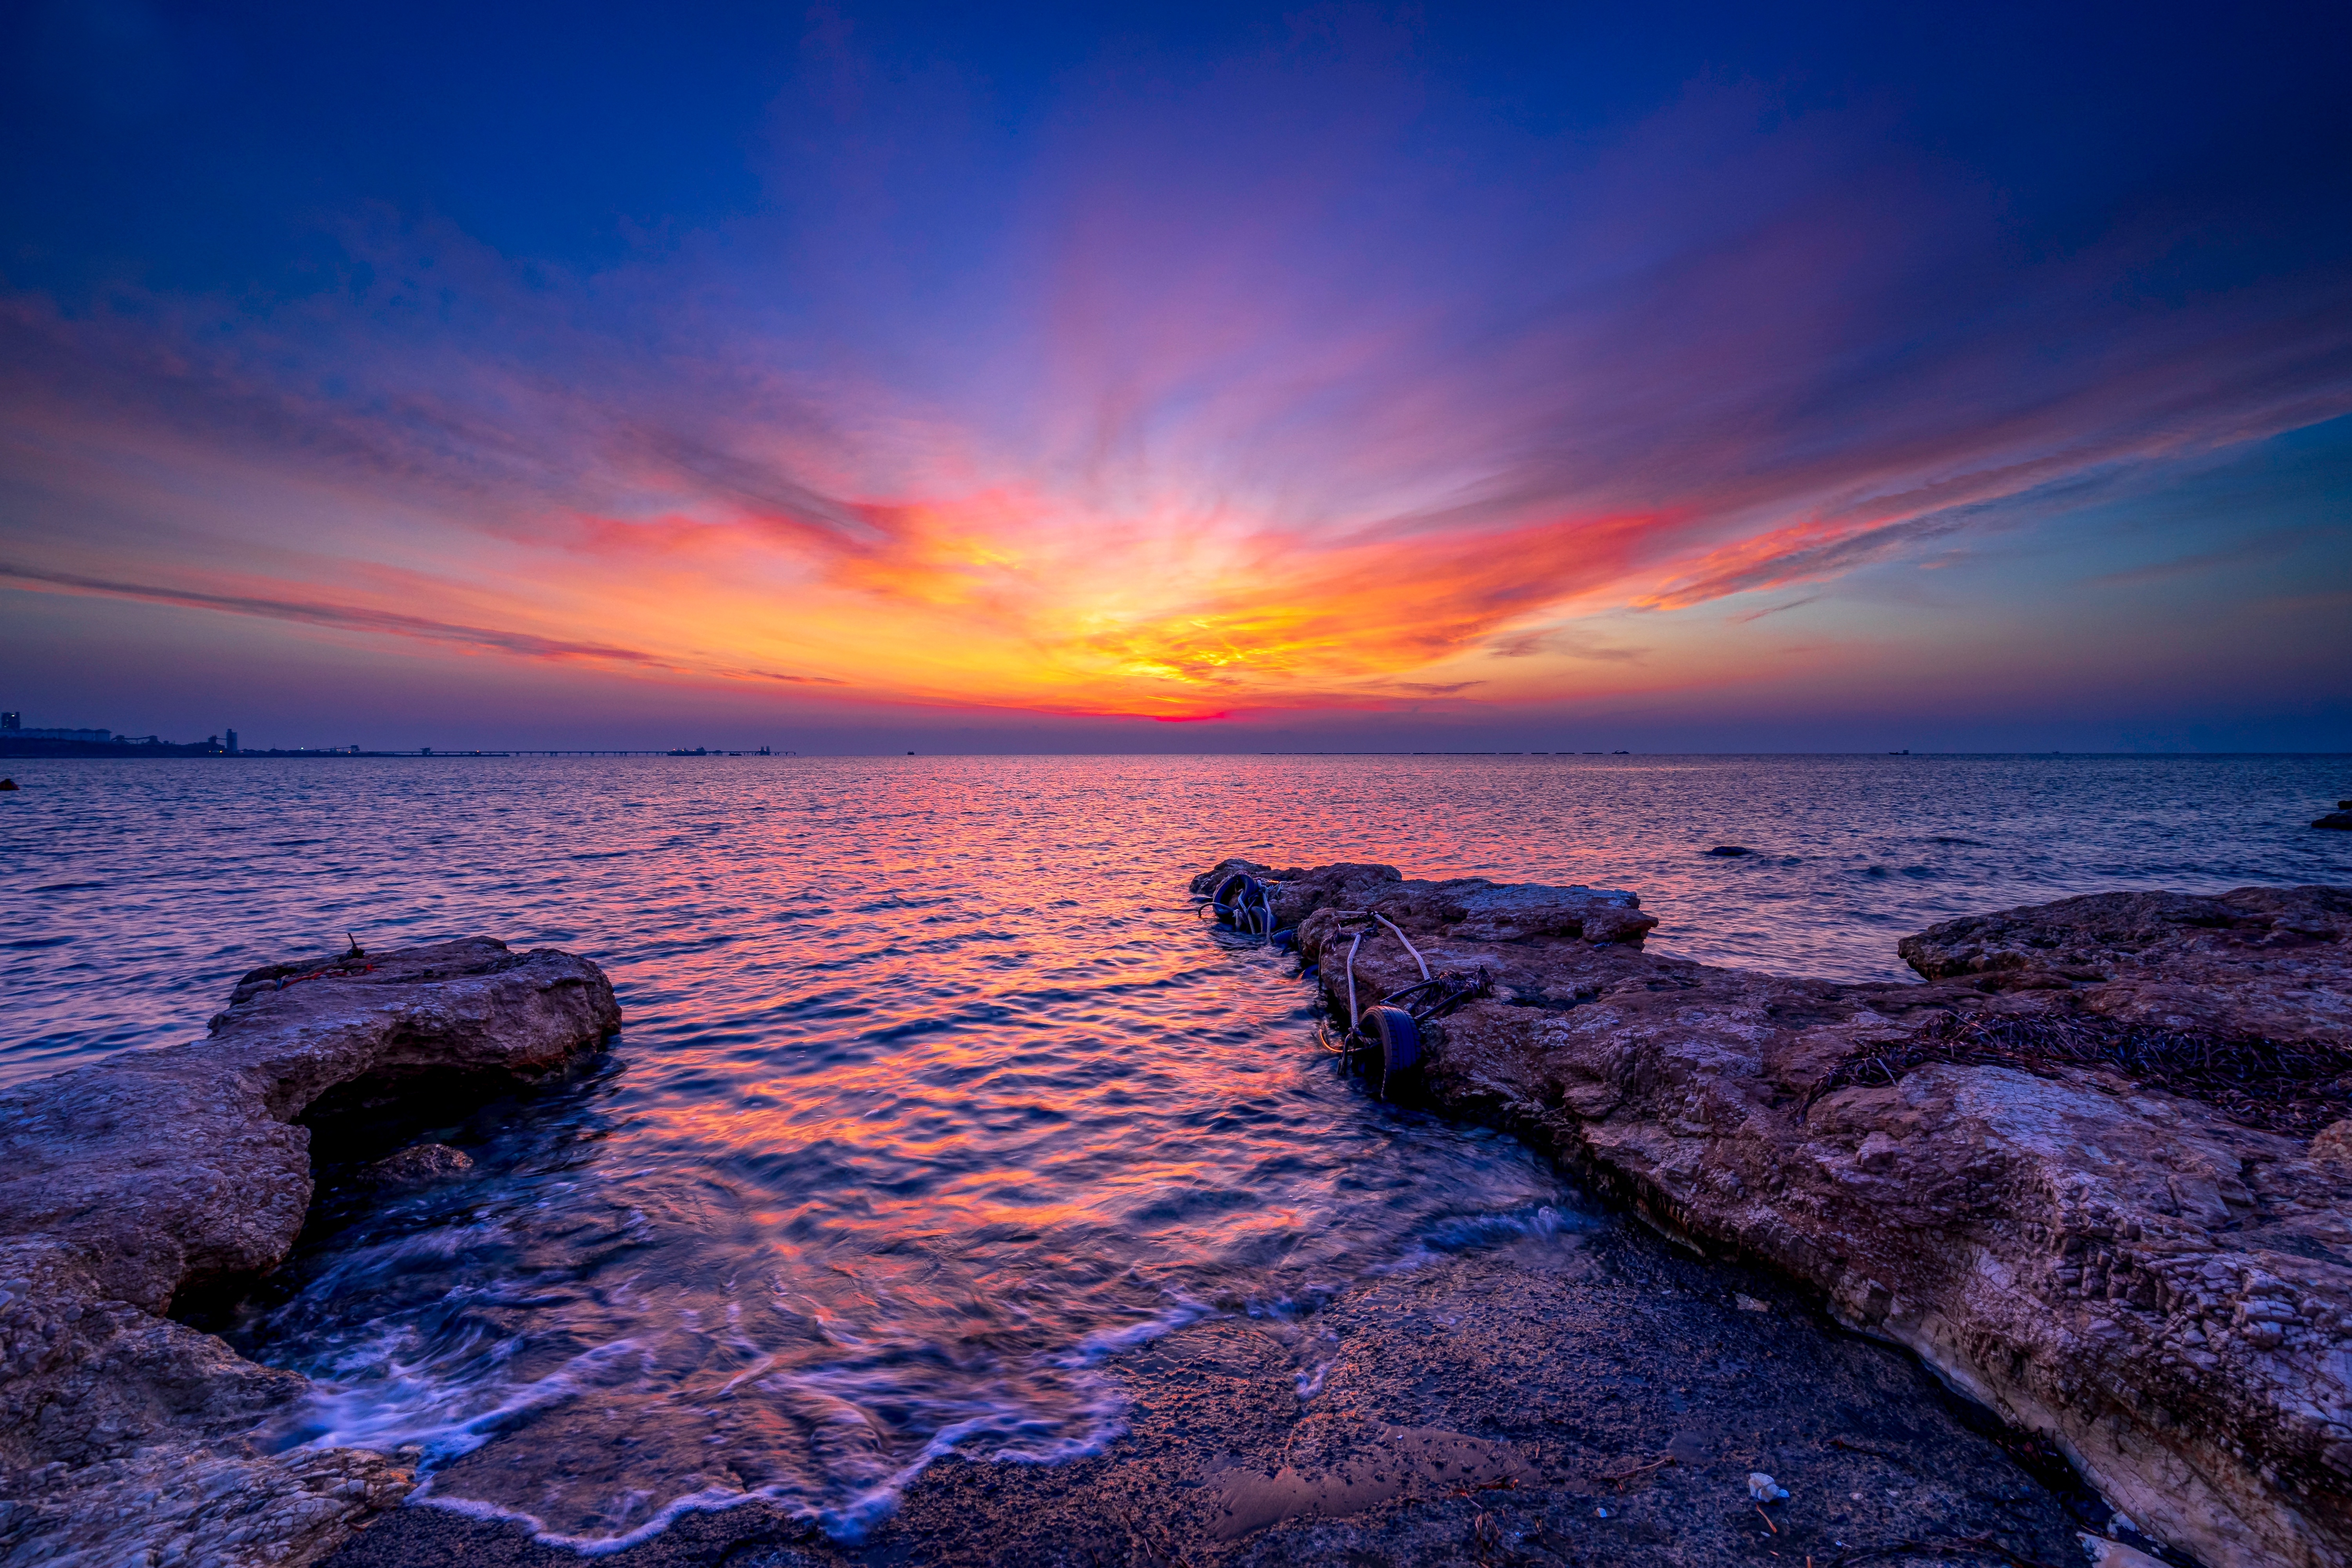 Mediterranean Sea Sunset Wallpaper Hd Nature 4k Wallpapers Images Photos And Background